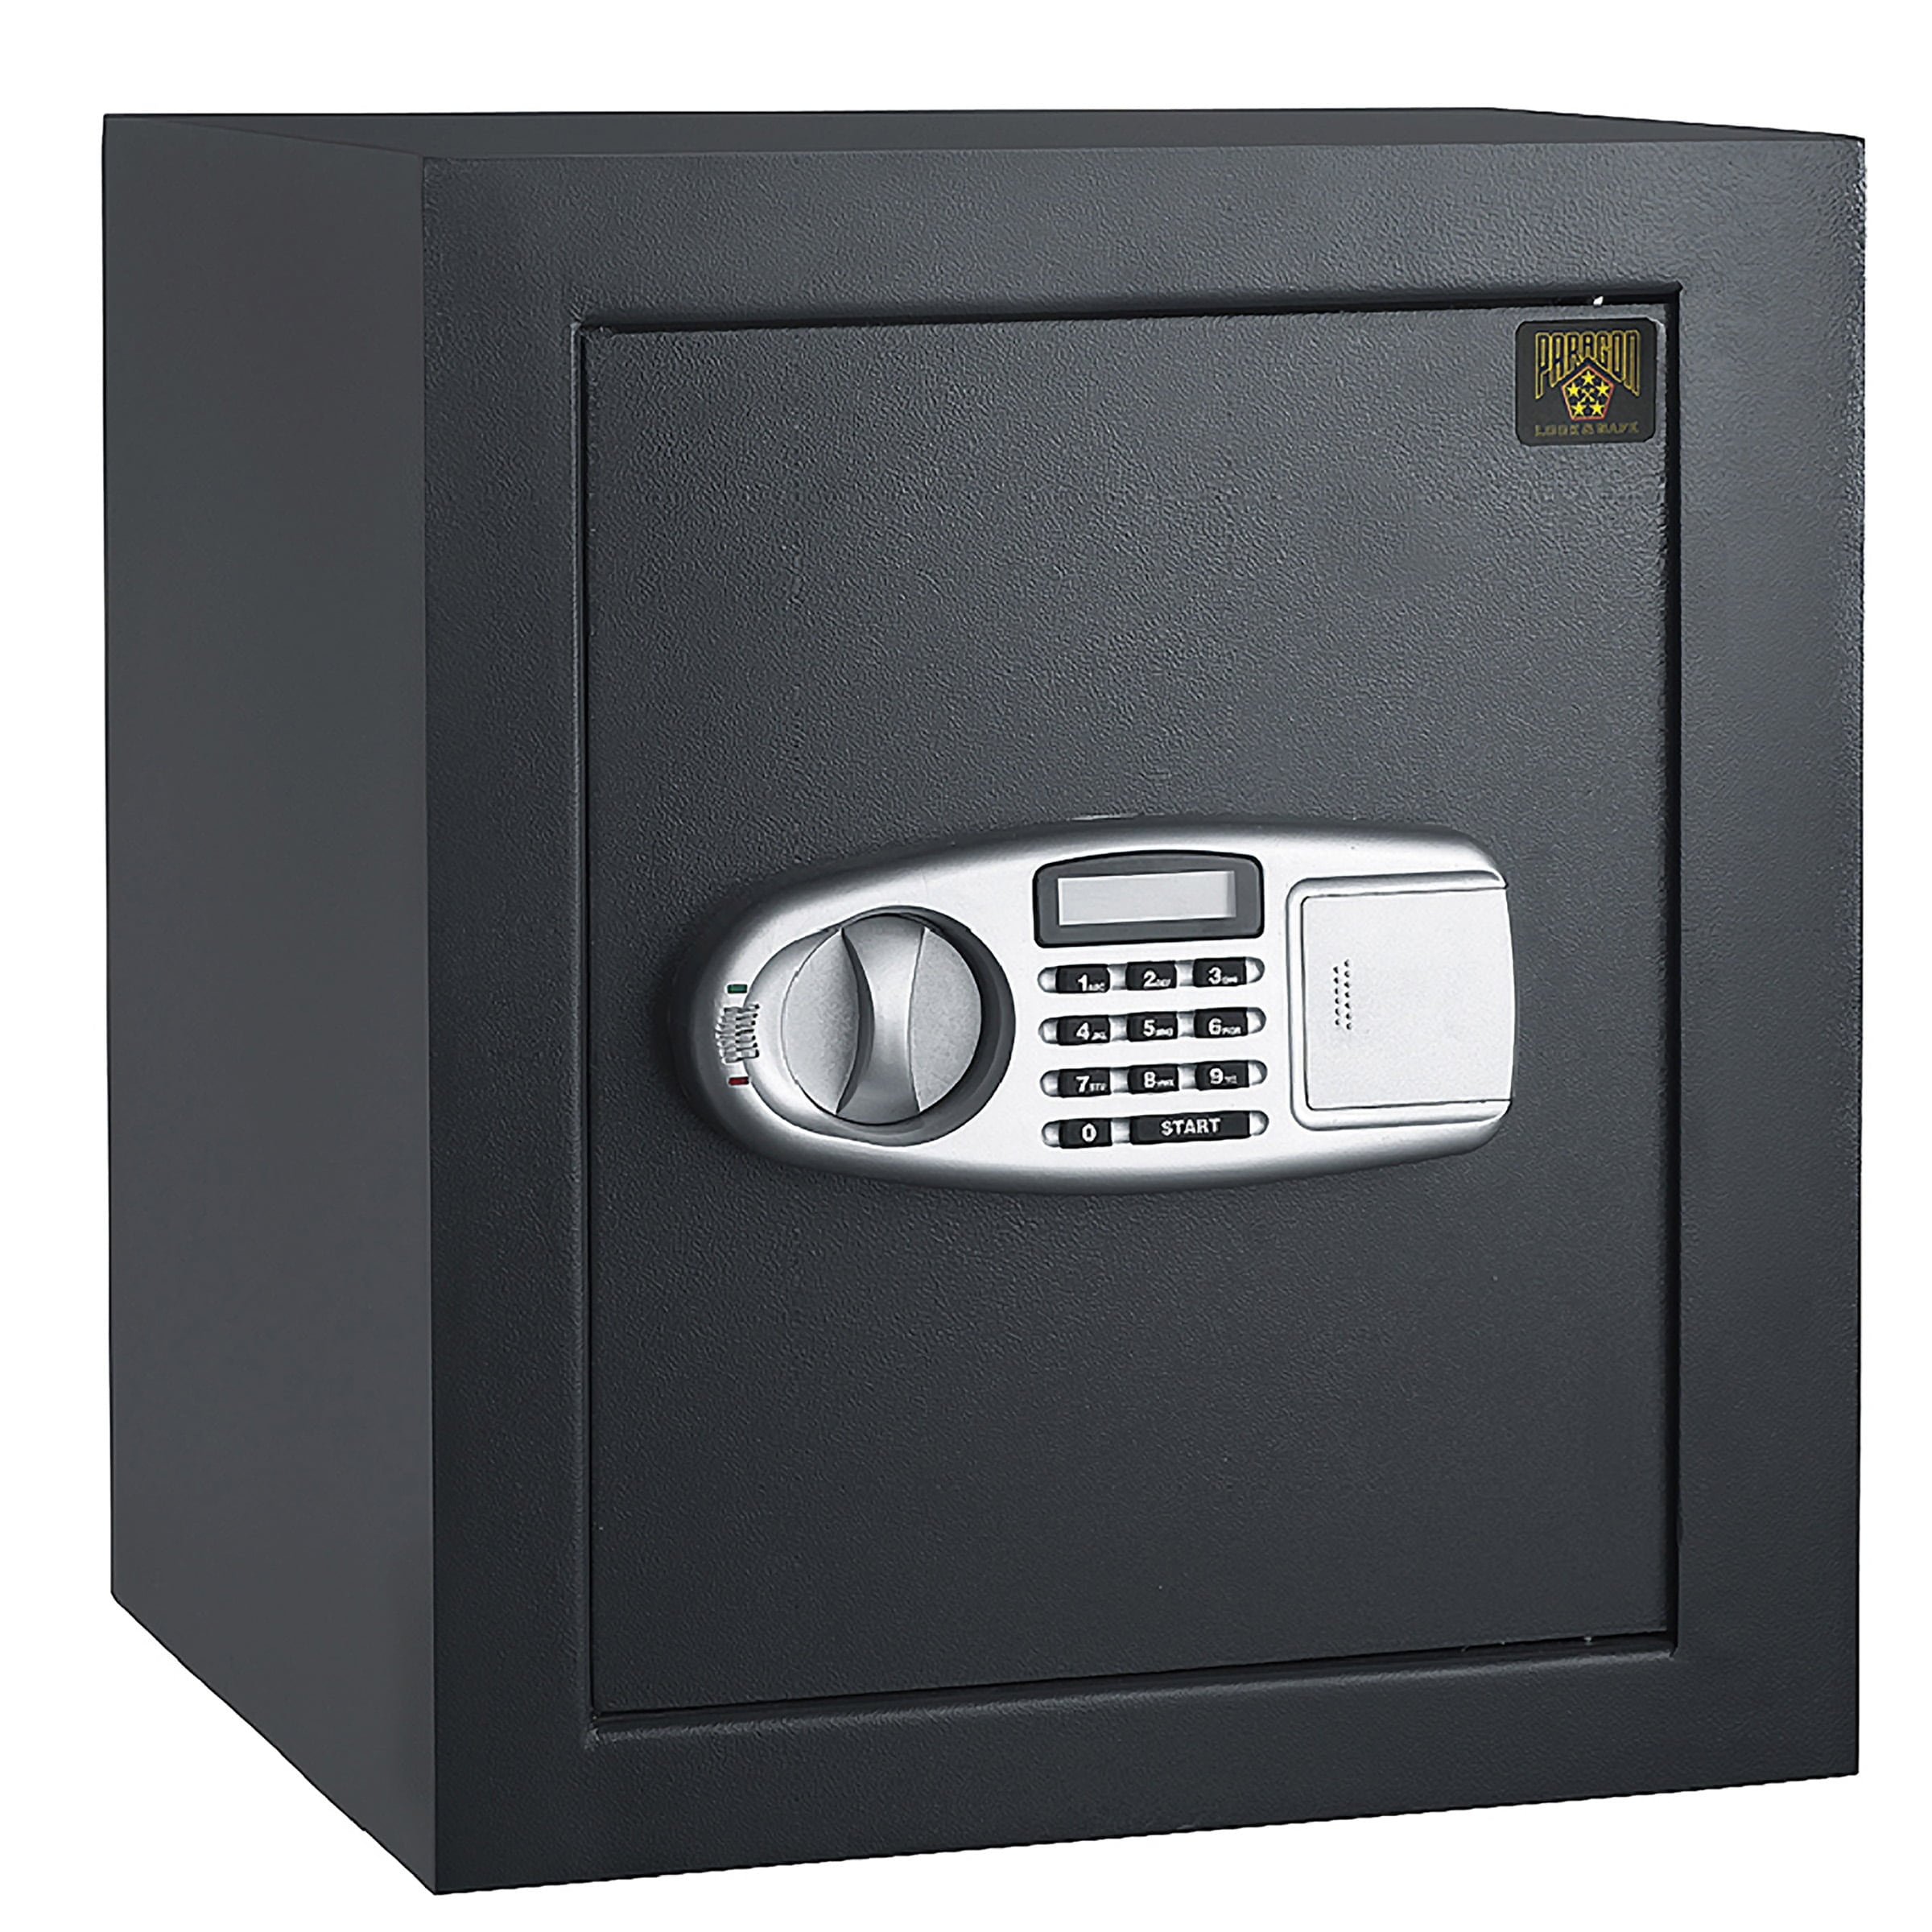 Electronic Flat Wall Safe Box with Digital Keypad and Manual Override Keys  Bed Bath  Beyond 37357627